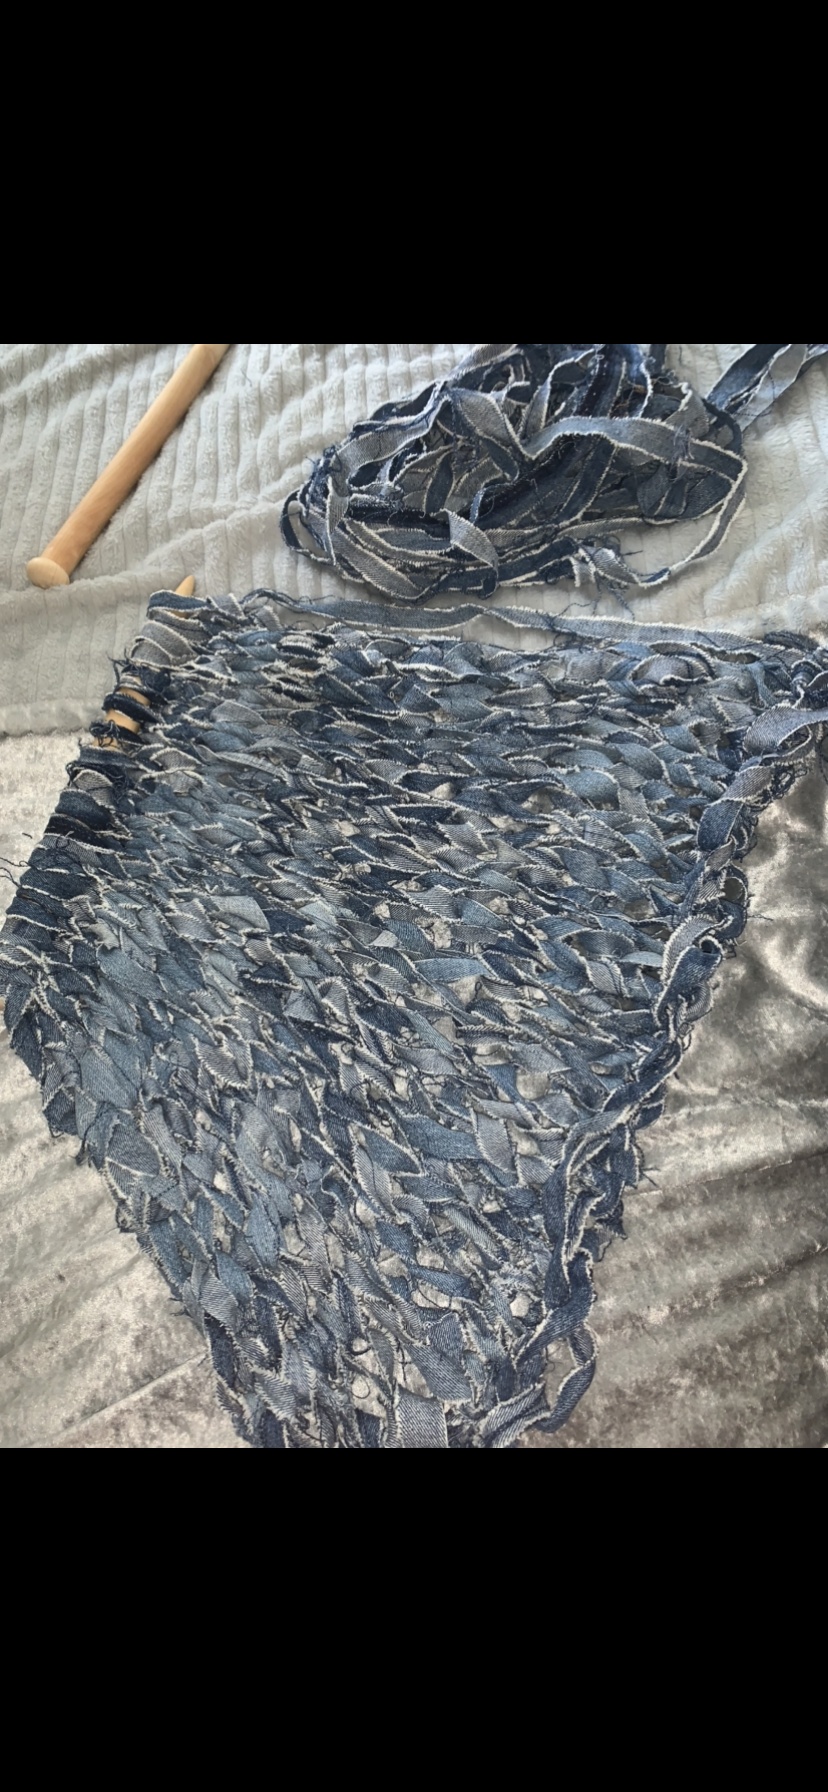 By Clara Weinmann. This is an image of my first garment. I am using old denim jeans that I collected, I wanted to upcycle in my final collection as it is something I have great interest in. I decided to cut them up into strips, sew them together and knit them. I used this technique as I felt it expresses the destressed and worried emotions I felt during covid.